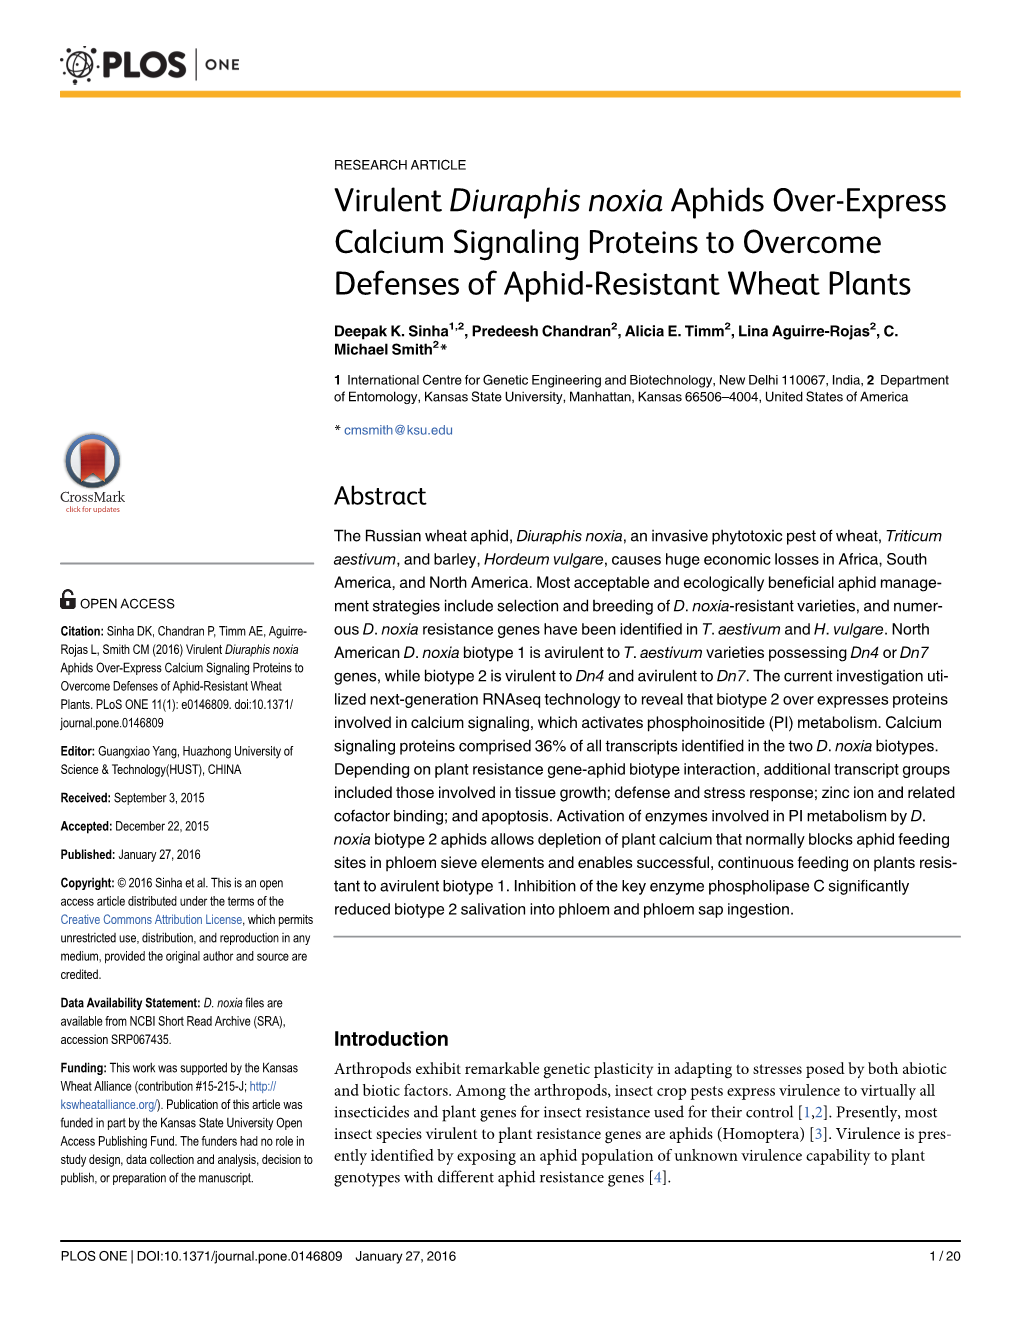 Virulent Diuraphis Noxia Aphids Over-Express Calcium Signaling Proteins to Overcome Defenses of Aphid-Resistant Wheat Plants